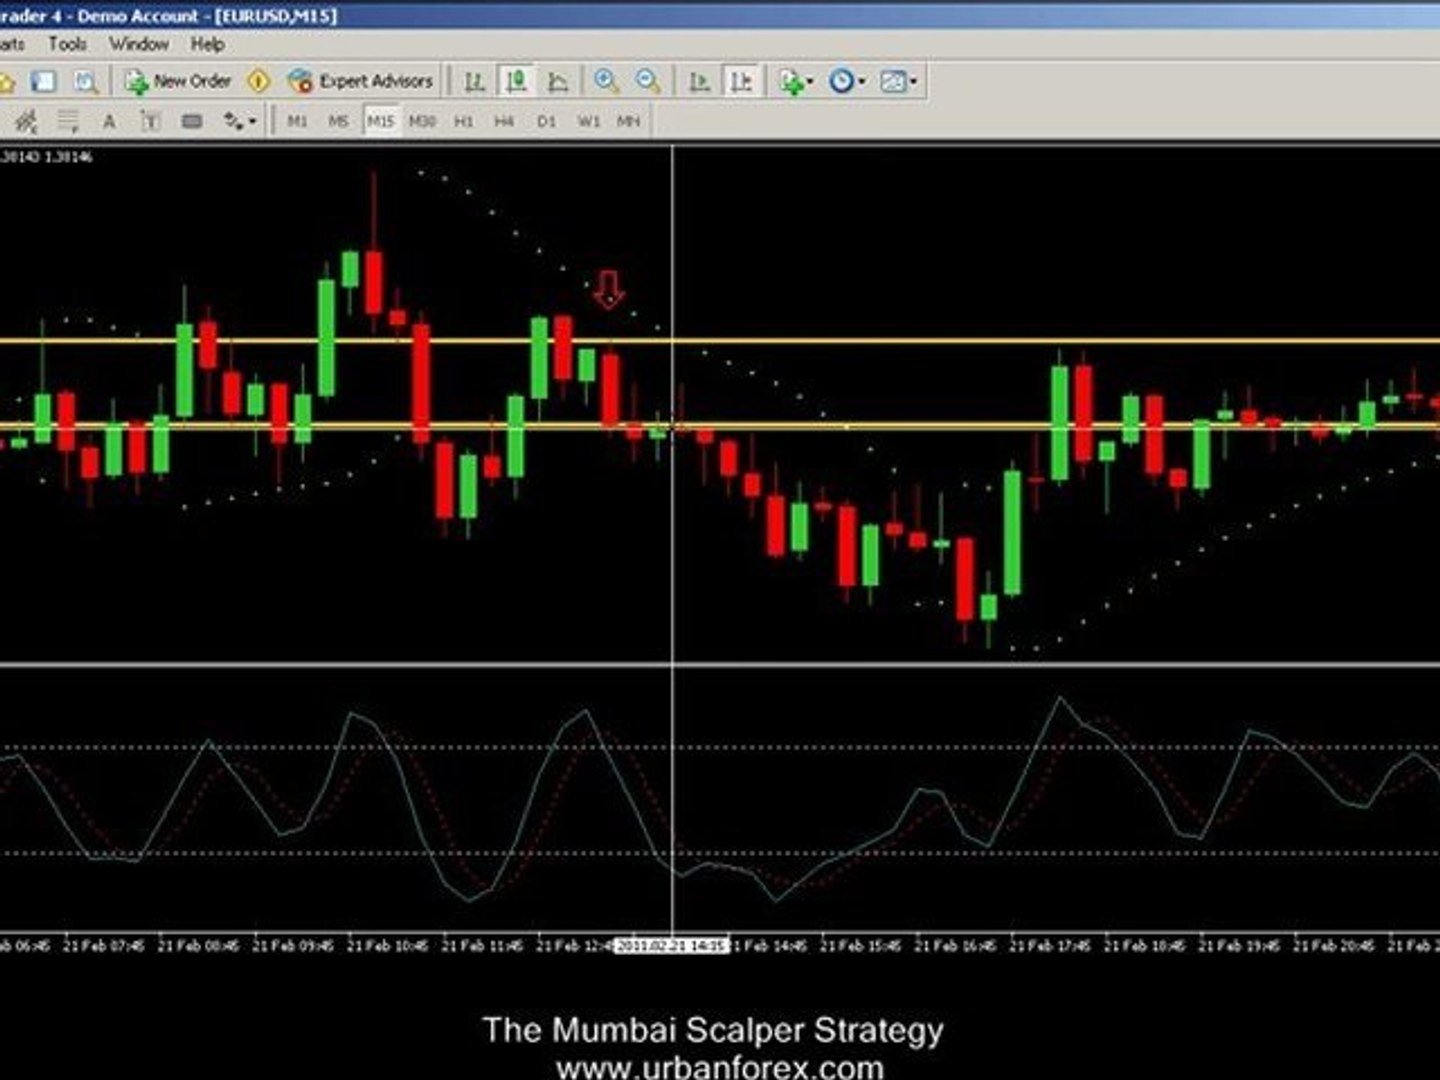 Urban forex the mumbai scalper strategy page the ruble exchange rate on the forex exchange